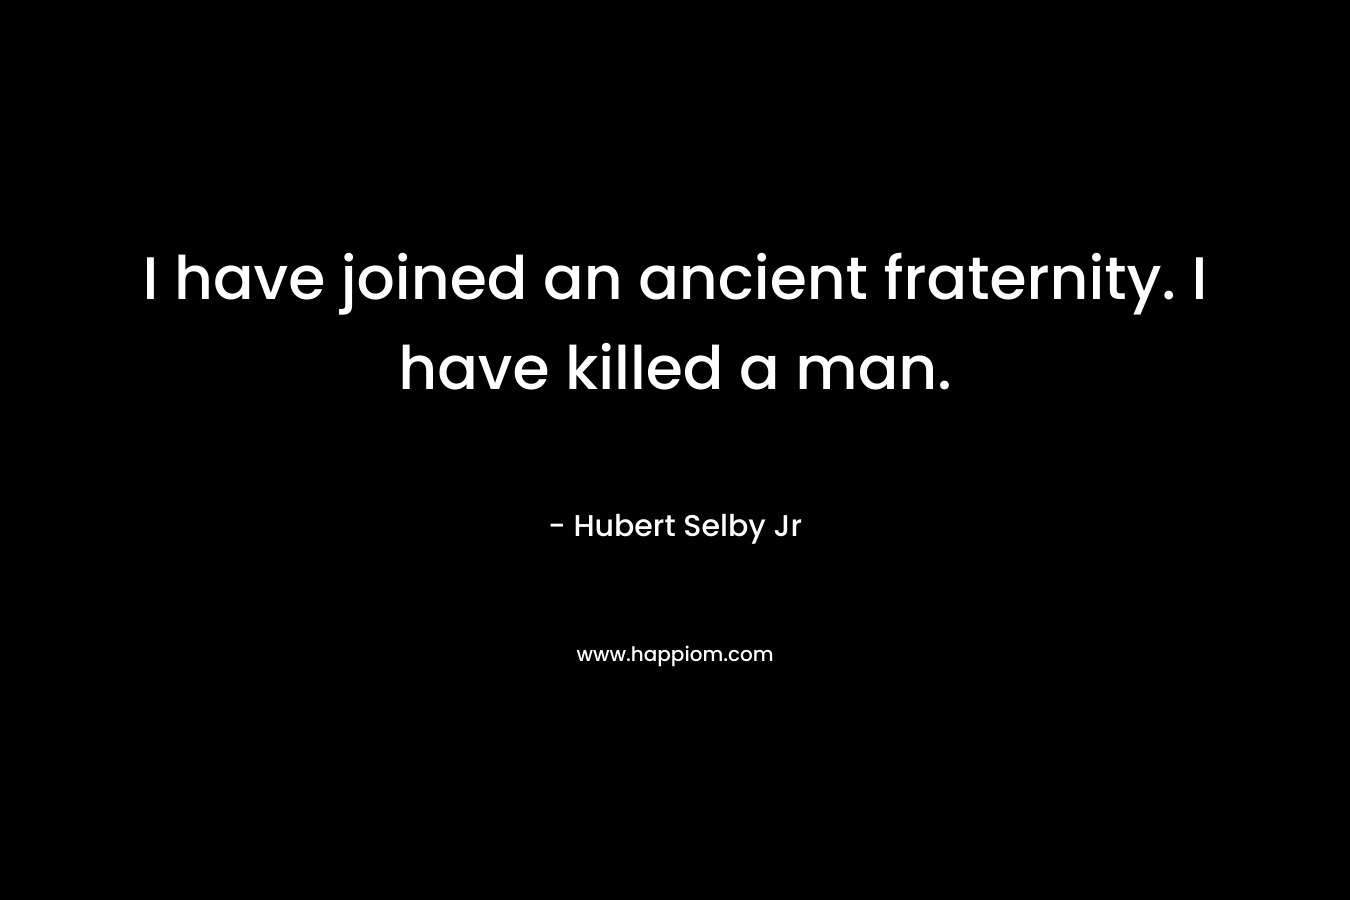 I have joined an ancient fraternity. I have killed a man. – Hubert Selby Jr